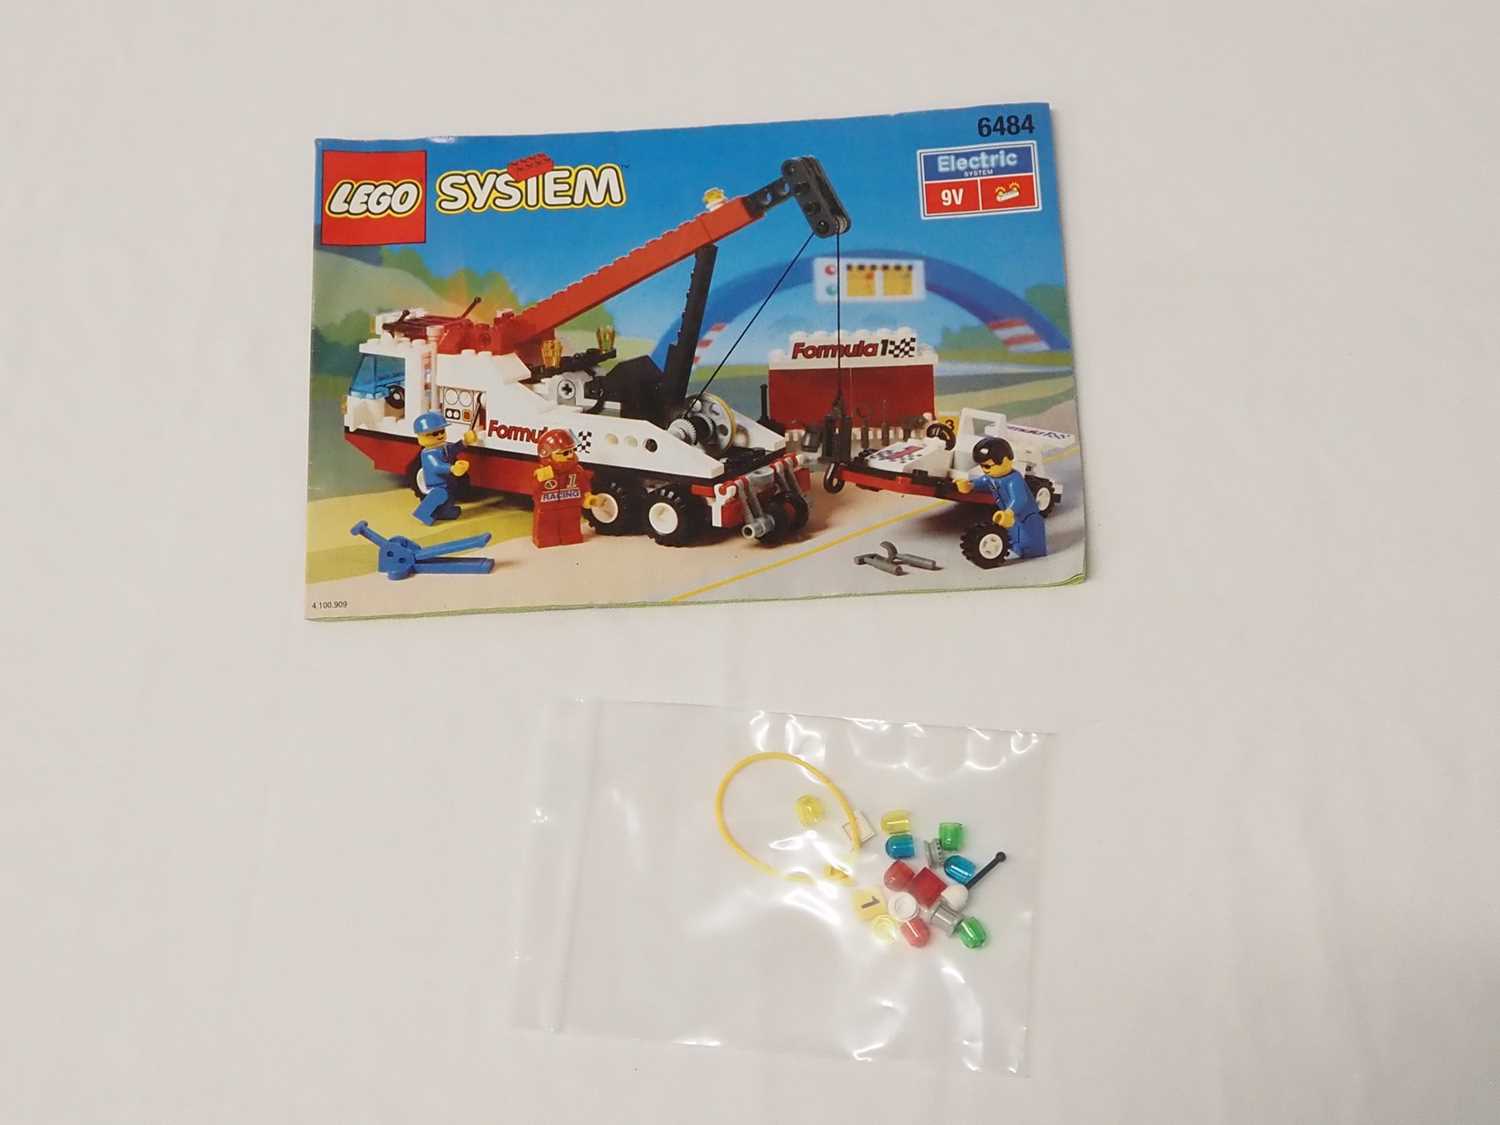 LEGO - CLASSIC TOWN #6484 F1 Hauler - 9V Electric System, appears complete with instructions, - Image 4 of 5